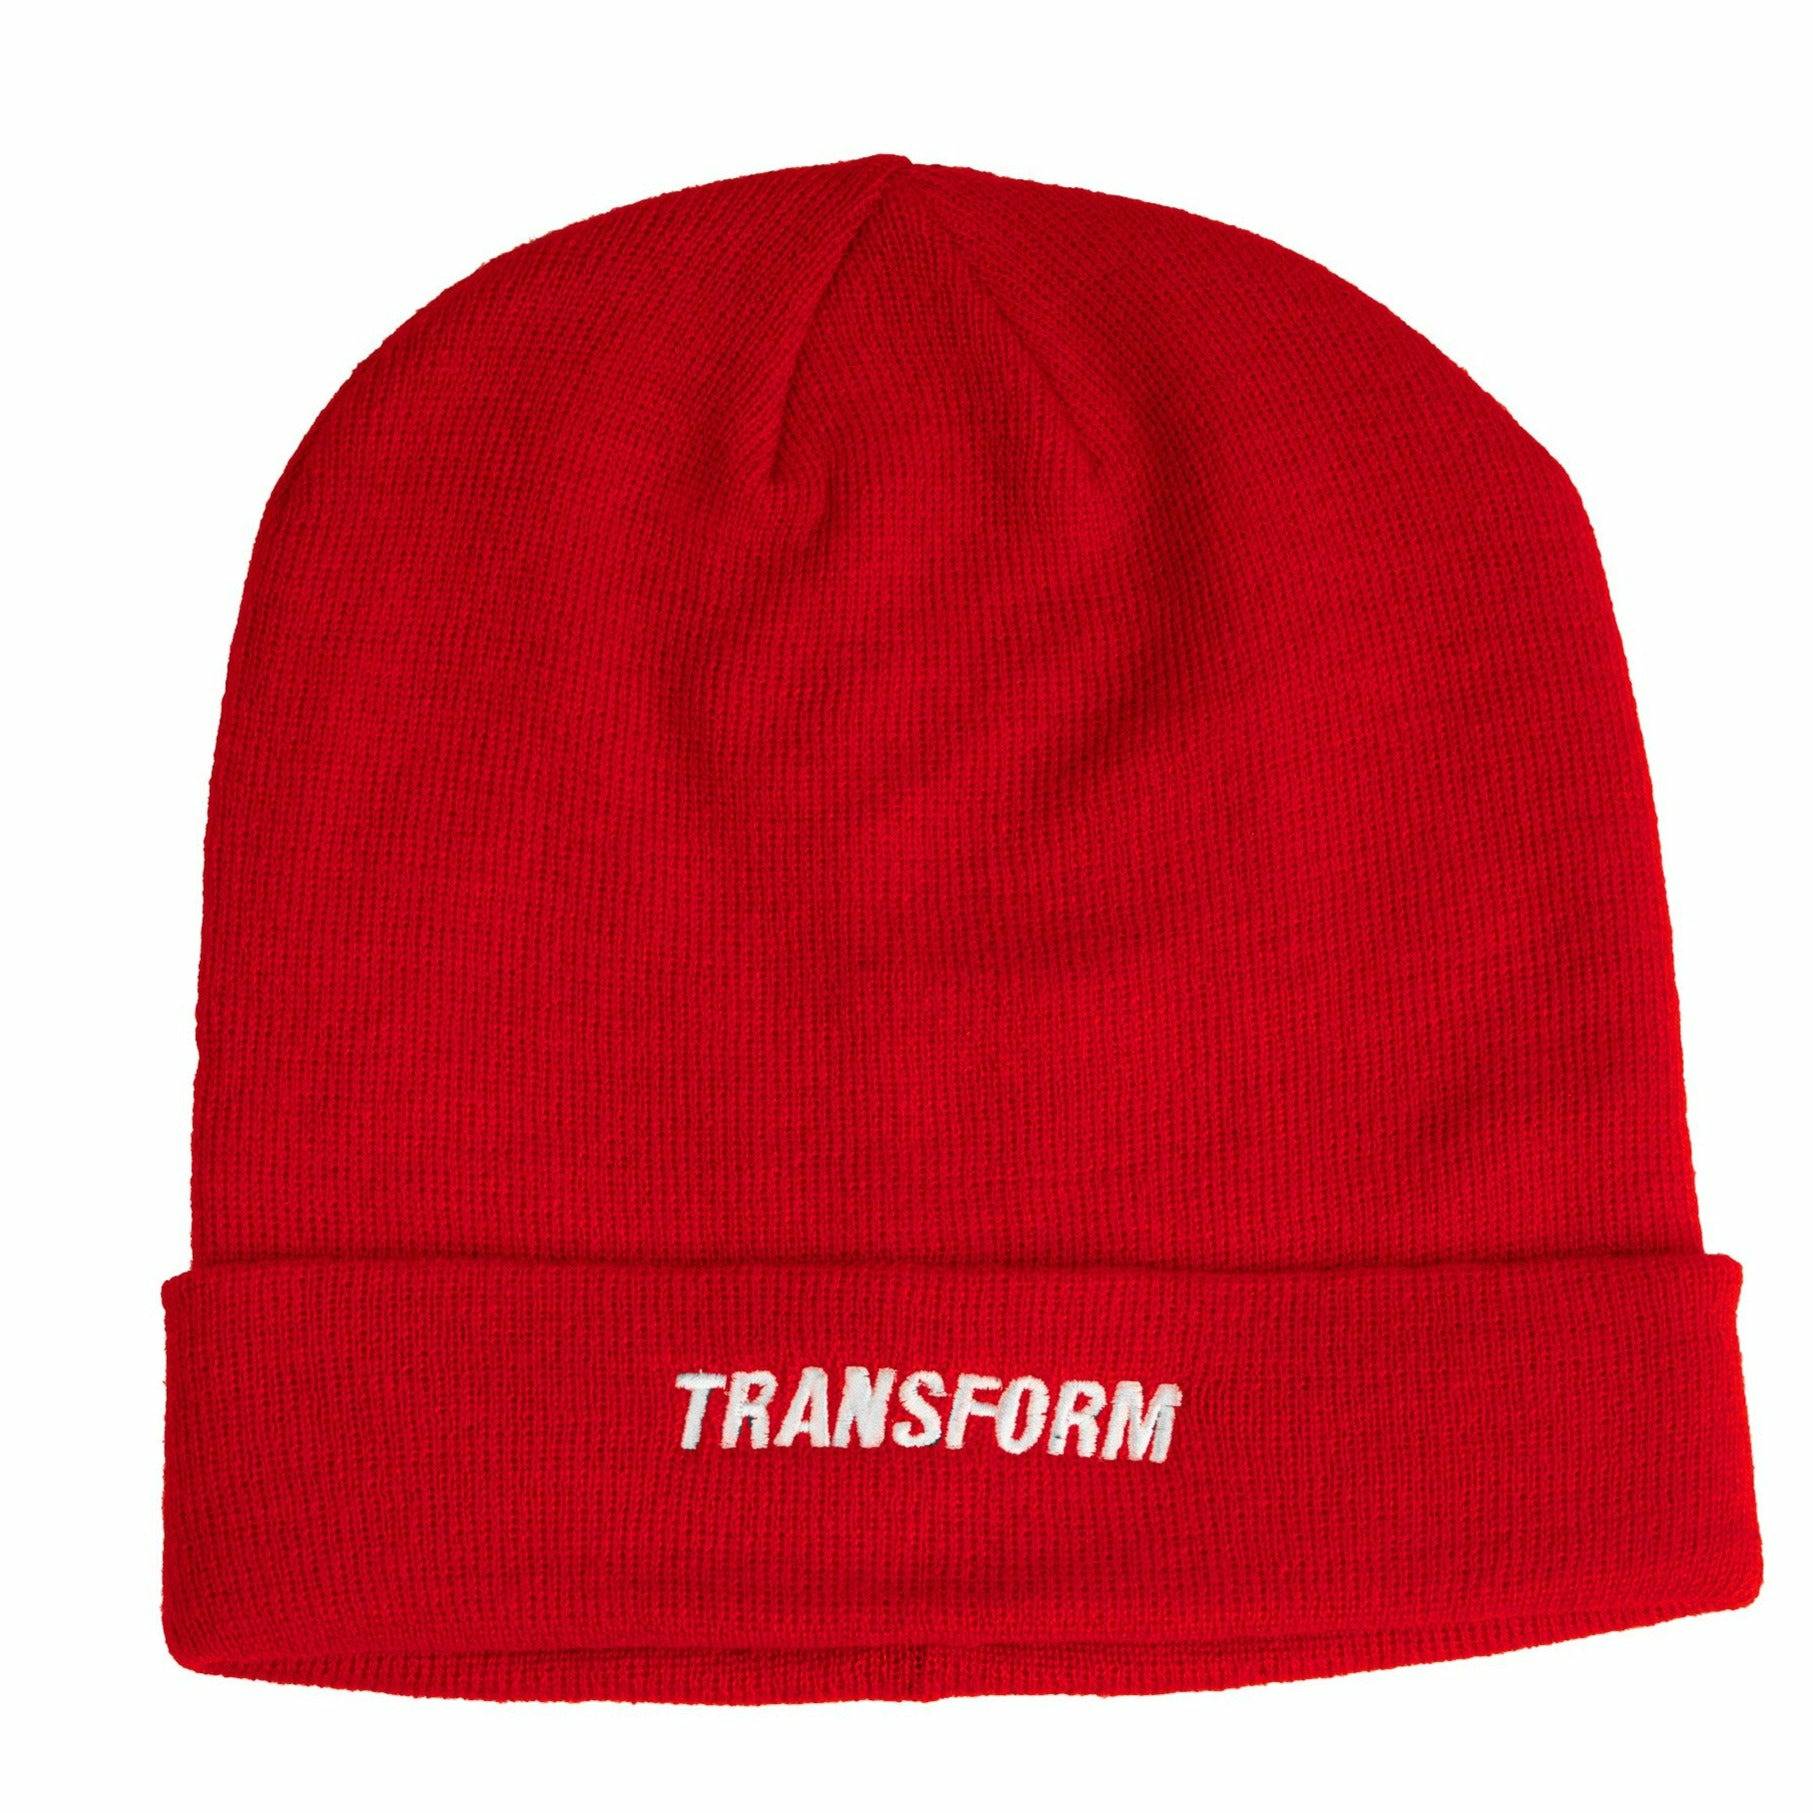 Firebrick The Fast Text Beanie Red